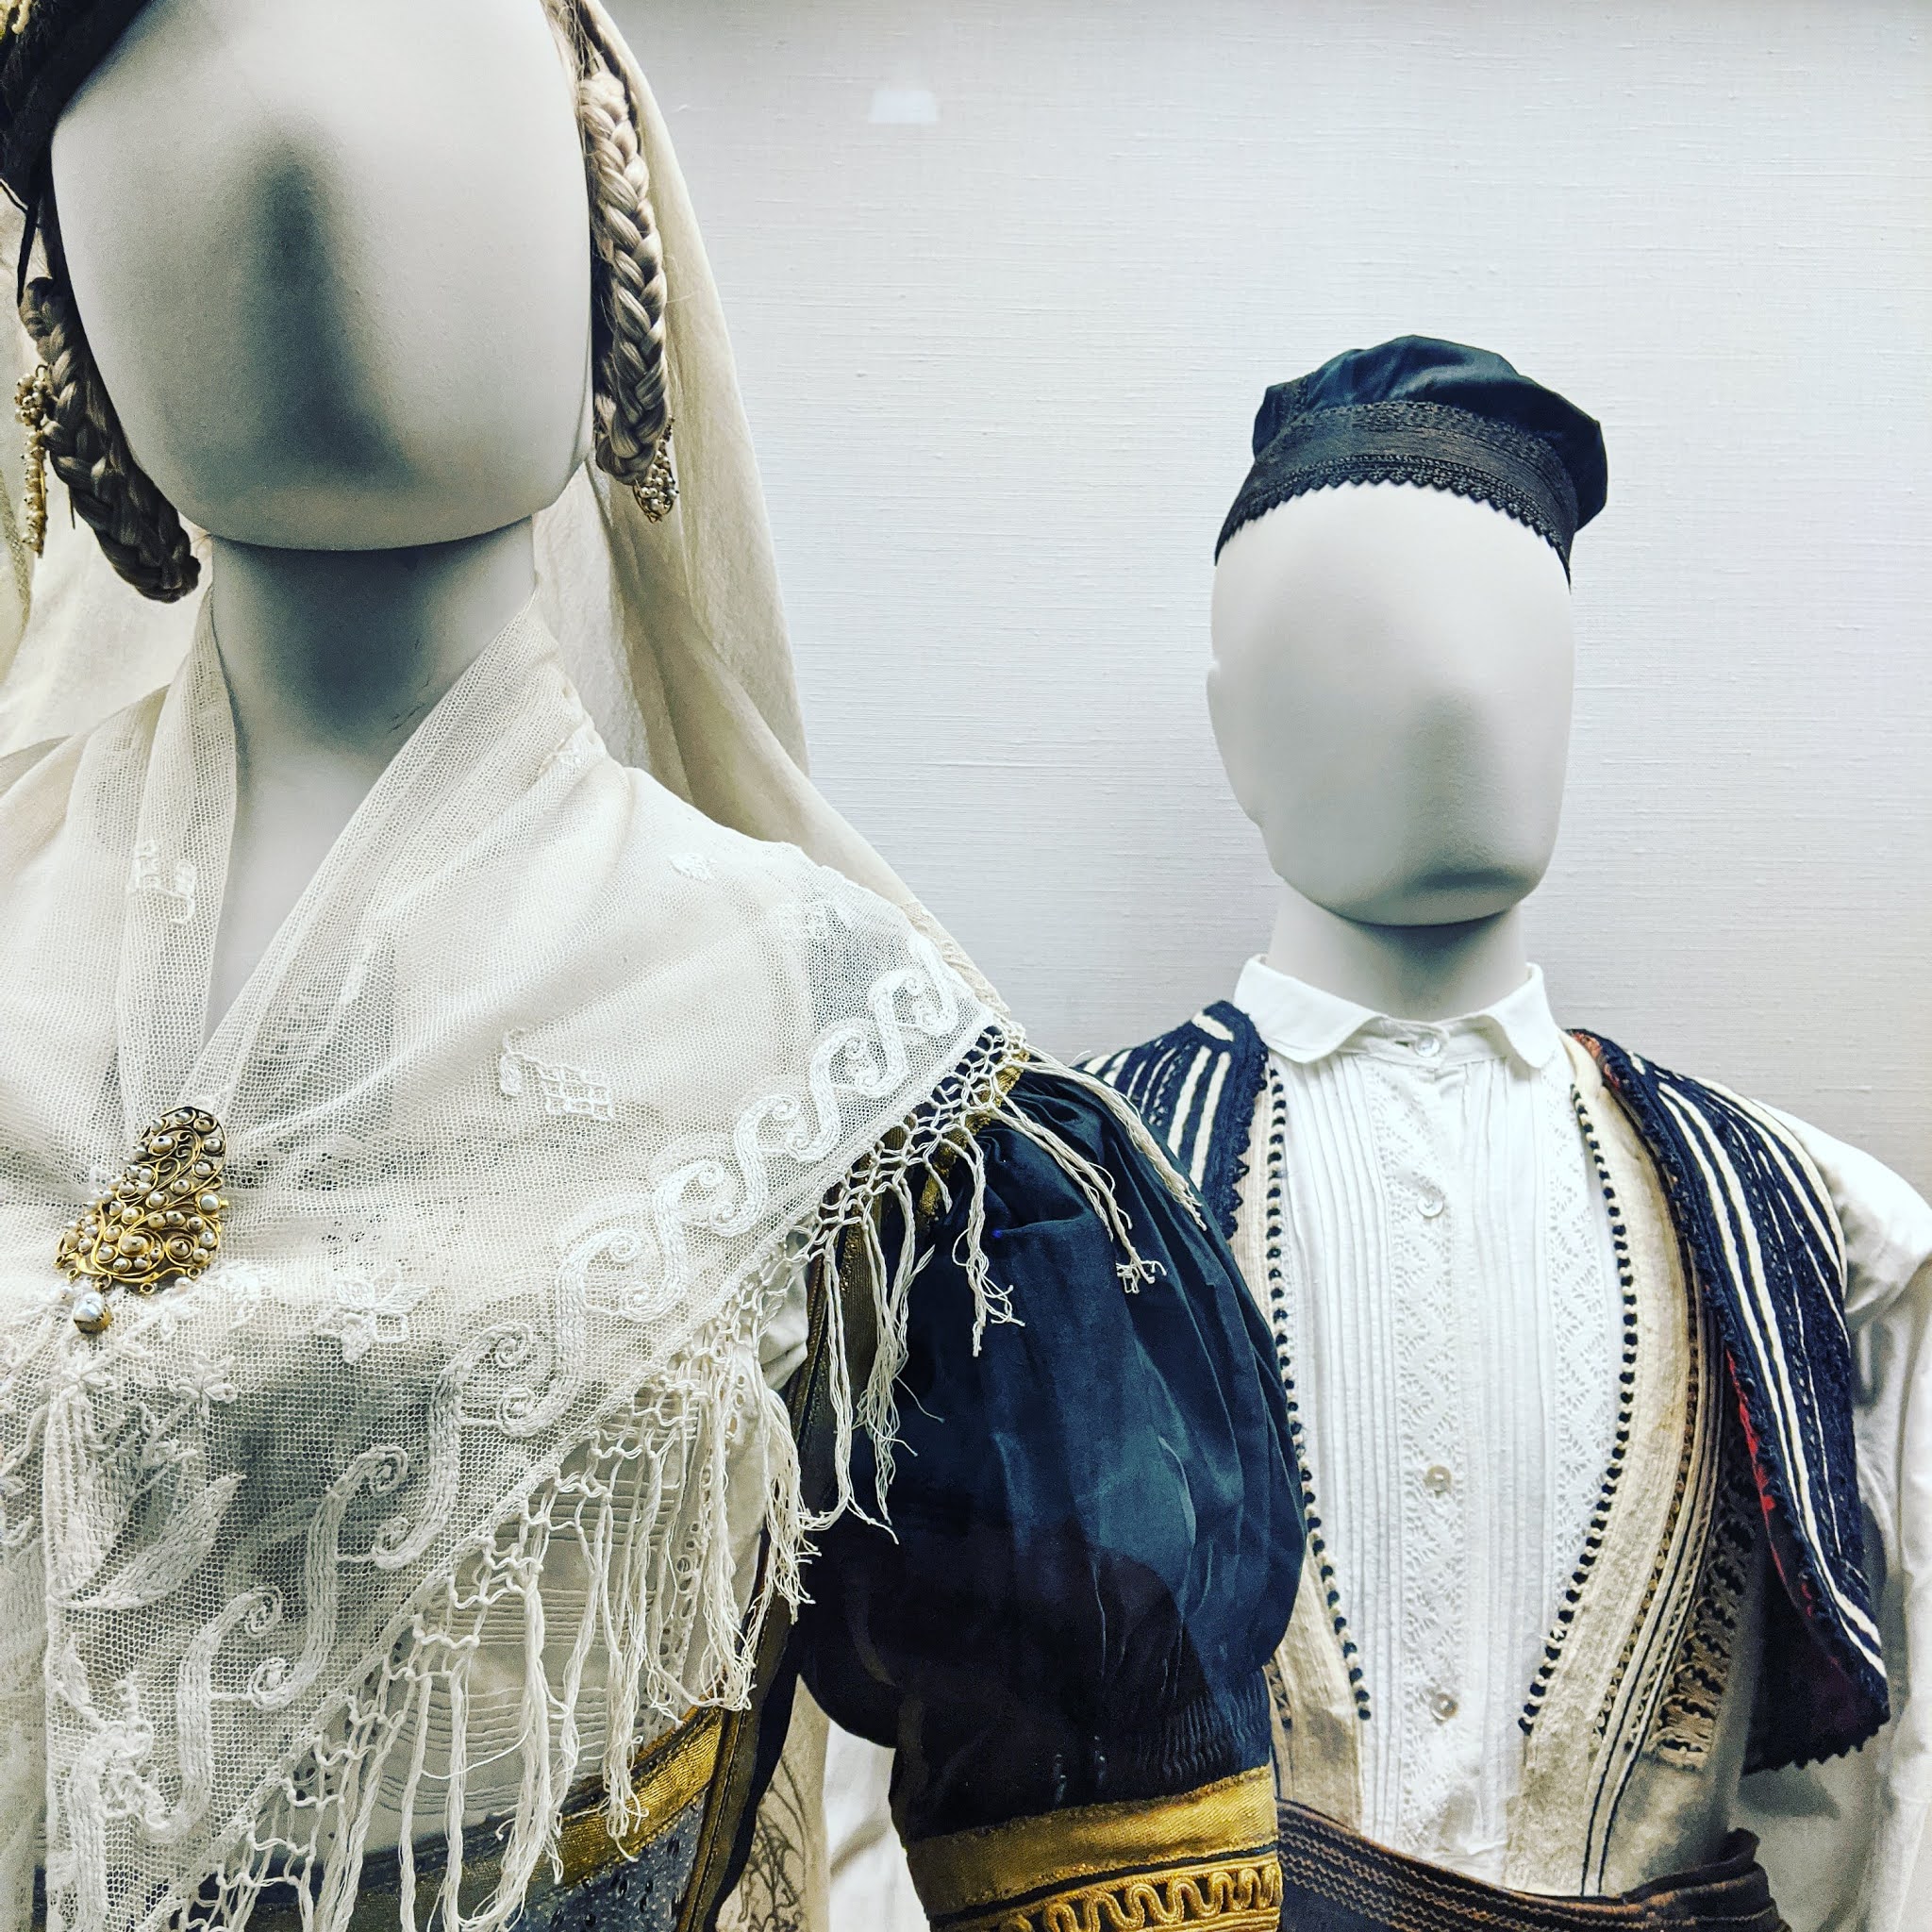 costumes on models in the Benaki Museum, one of the best things to see during a weekend in athens